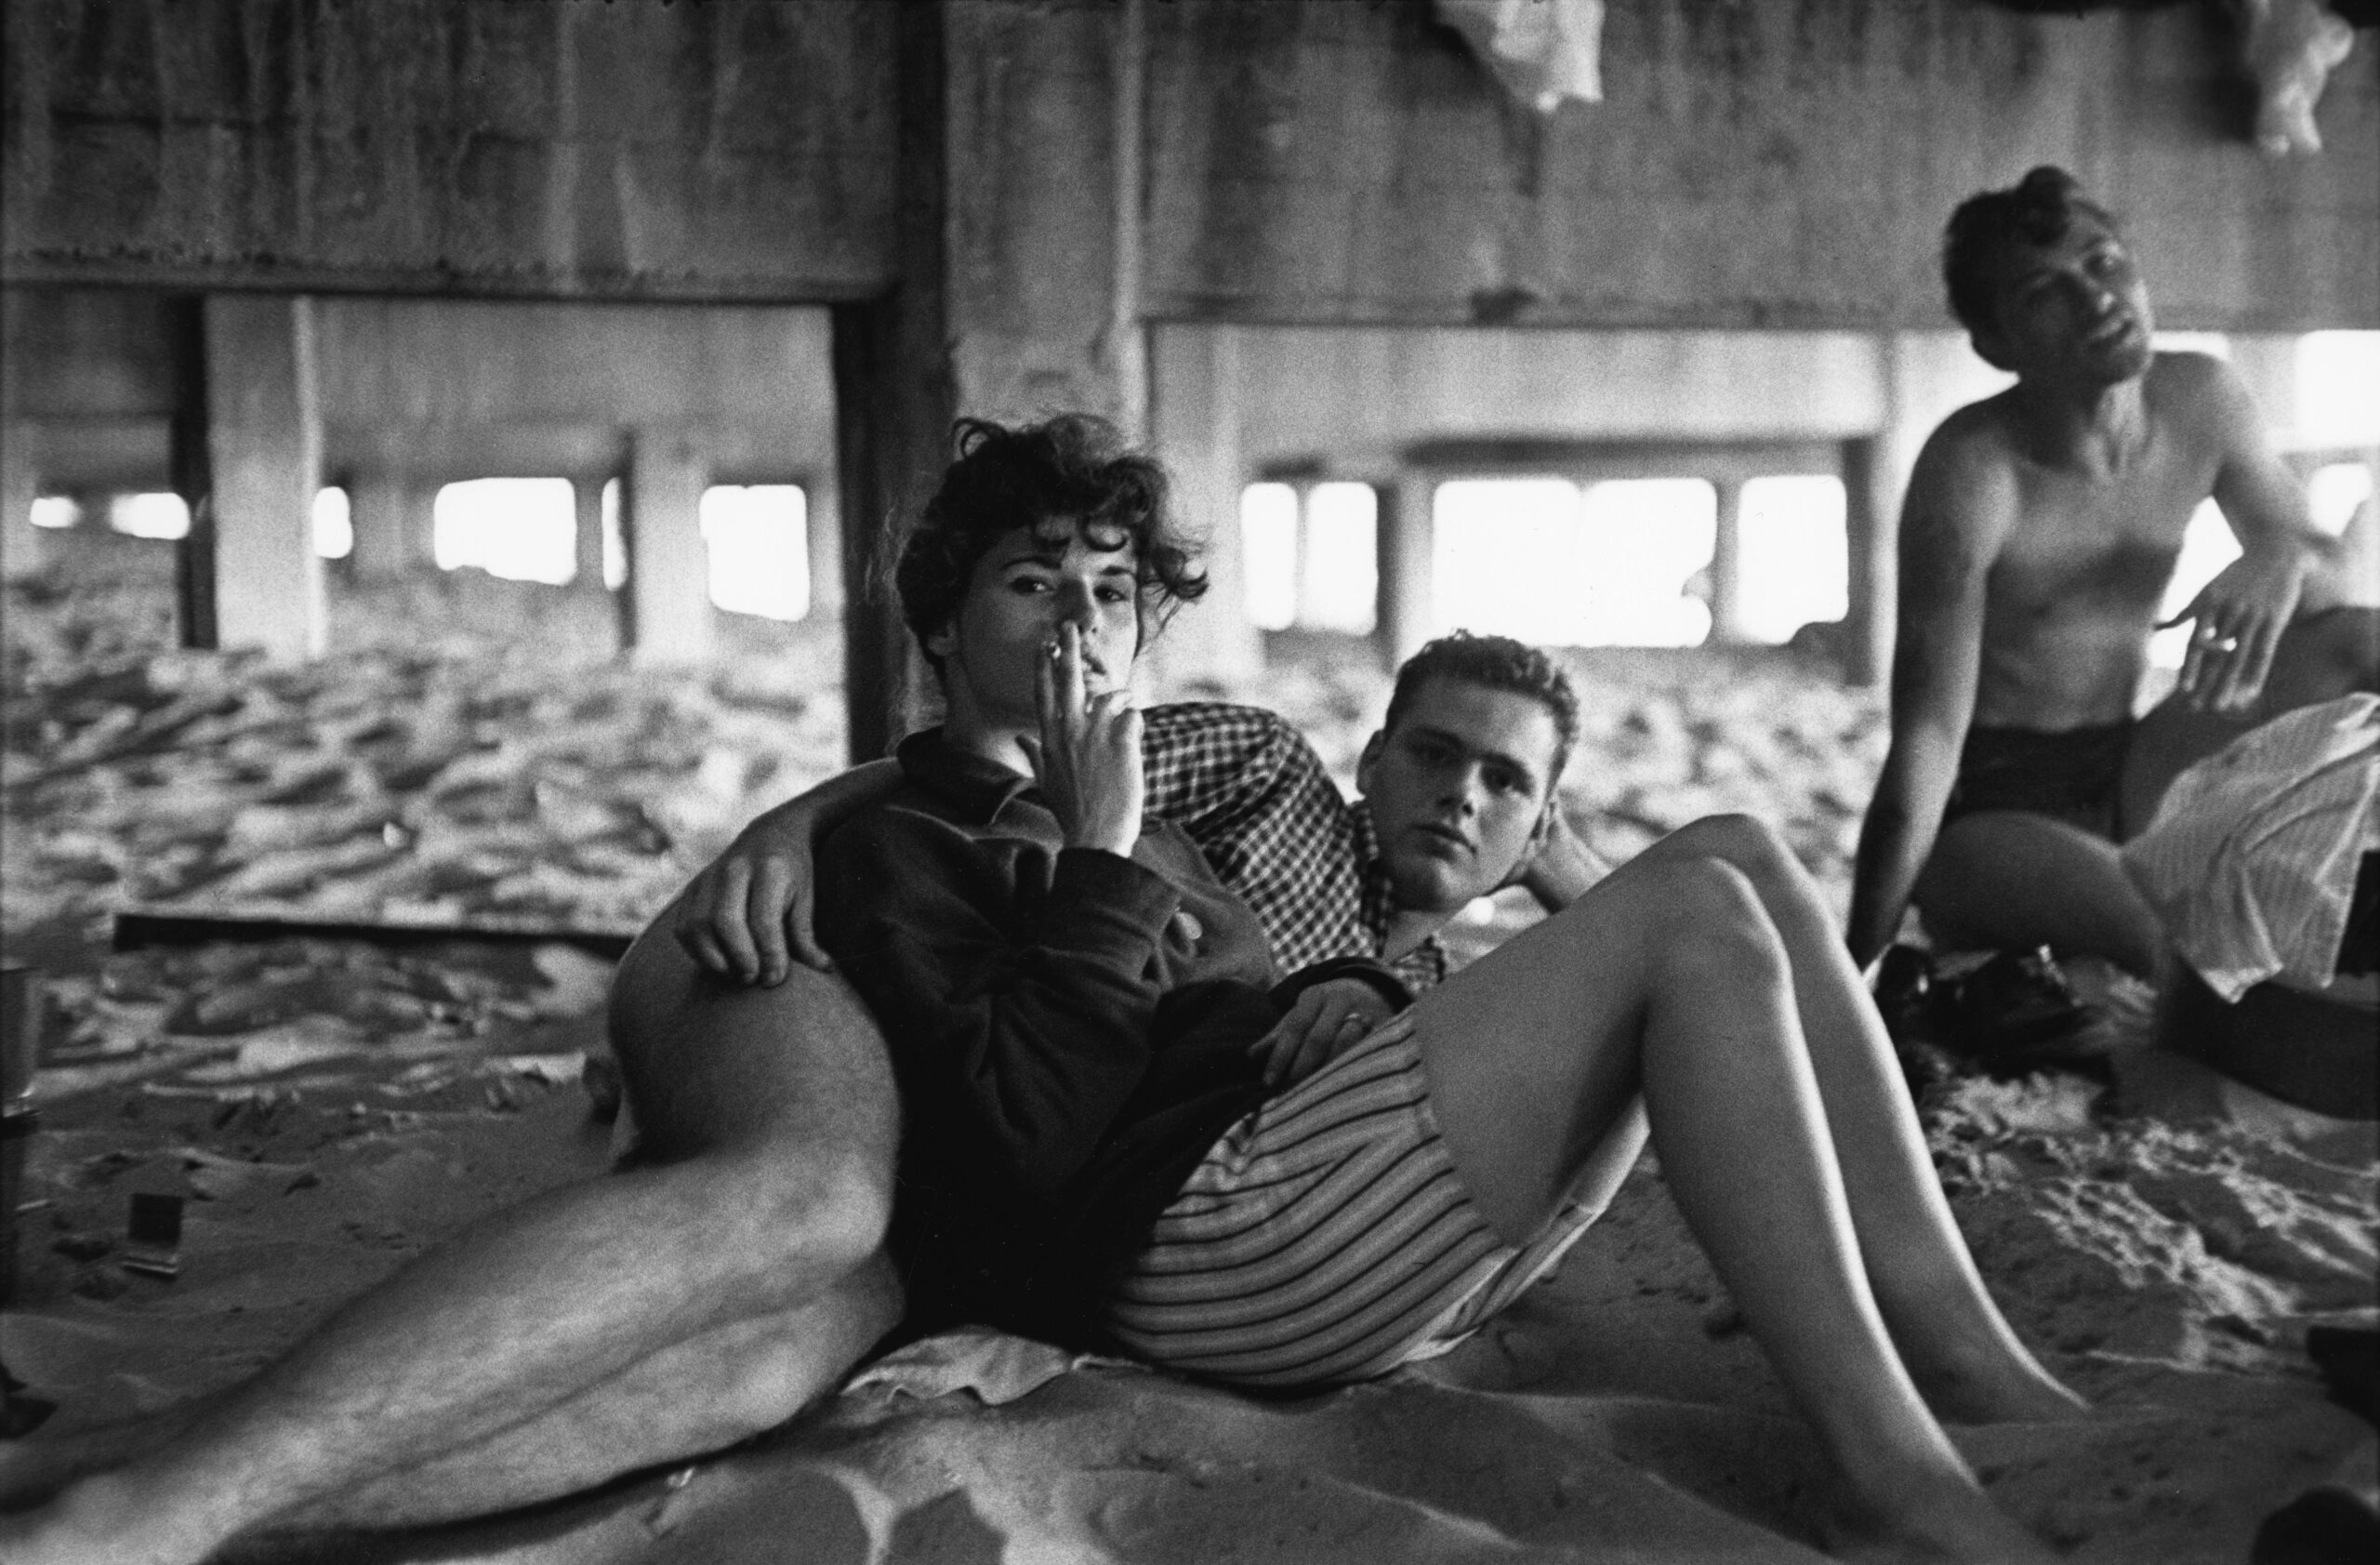 These Important Photos by Bruce Davidson are Previously Unseen